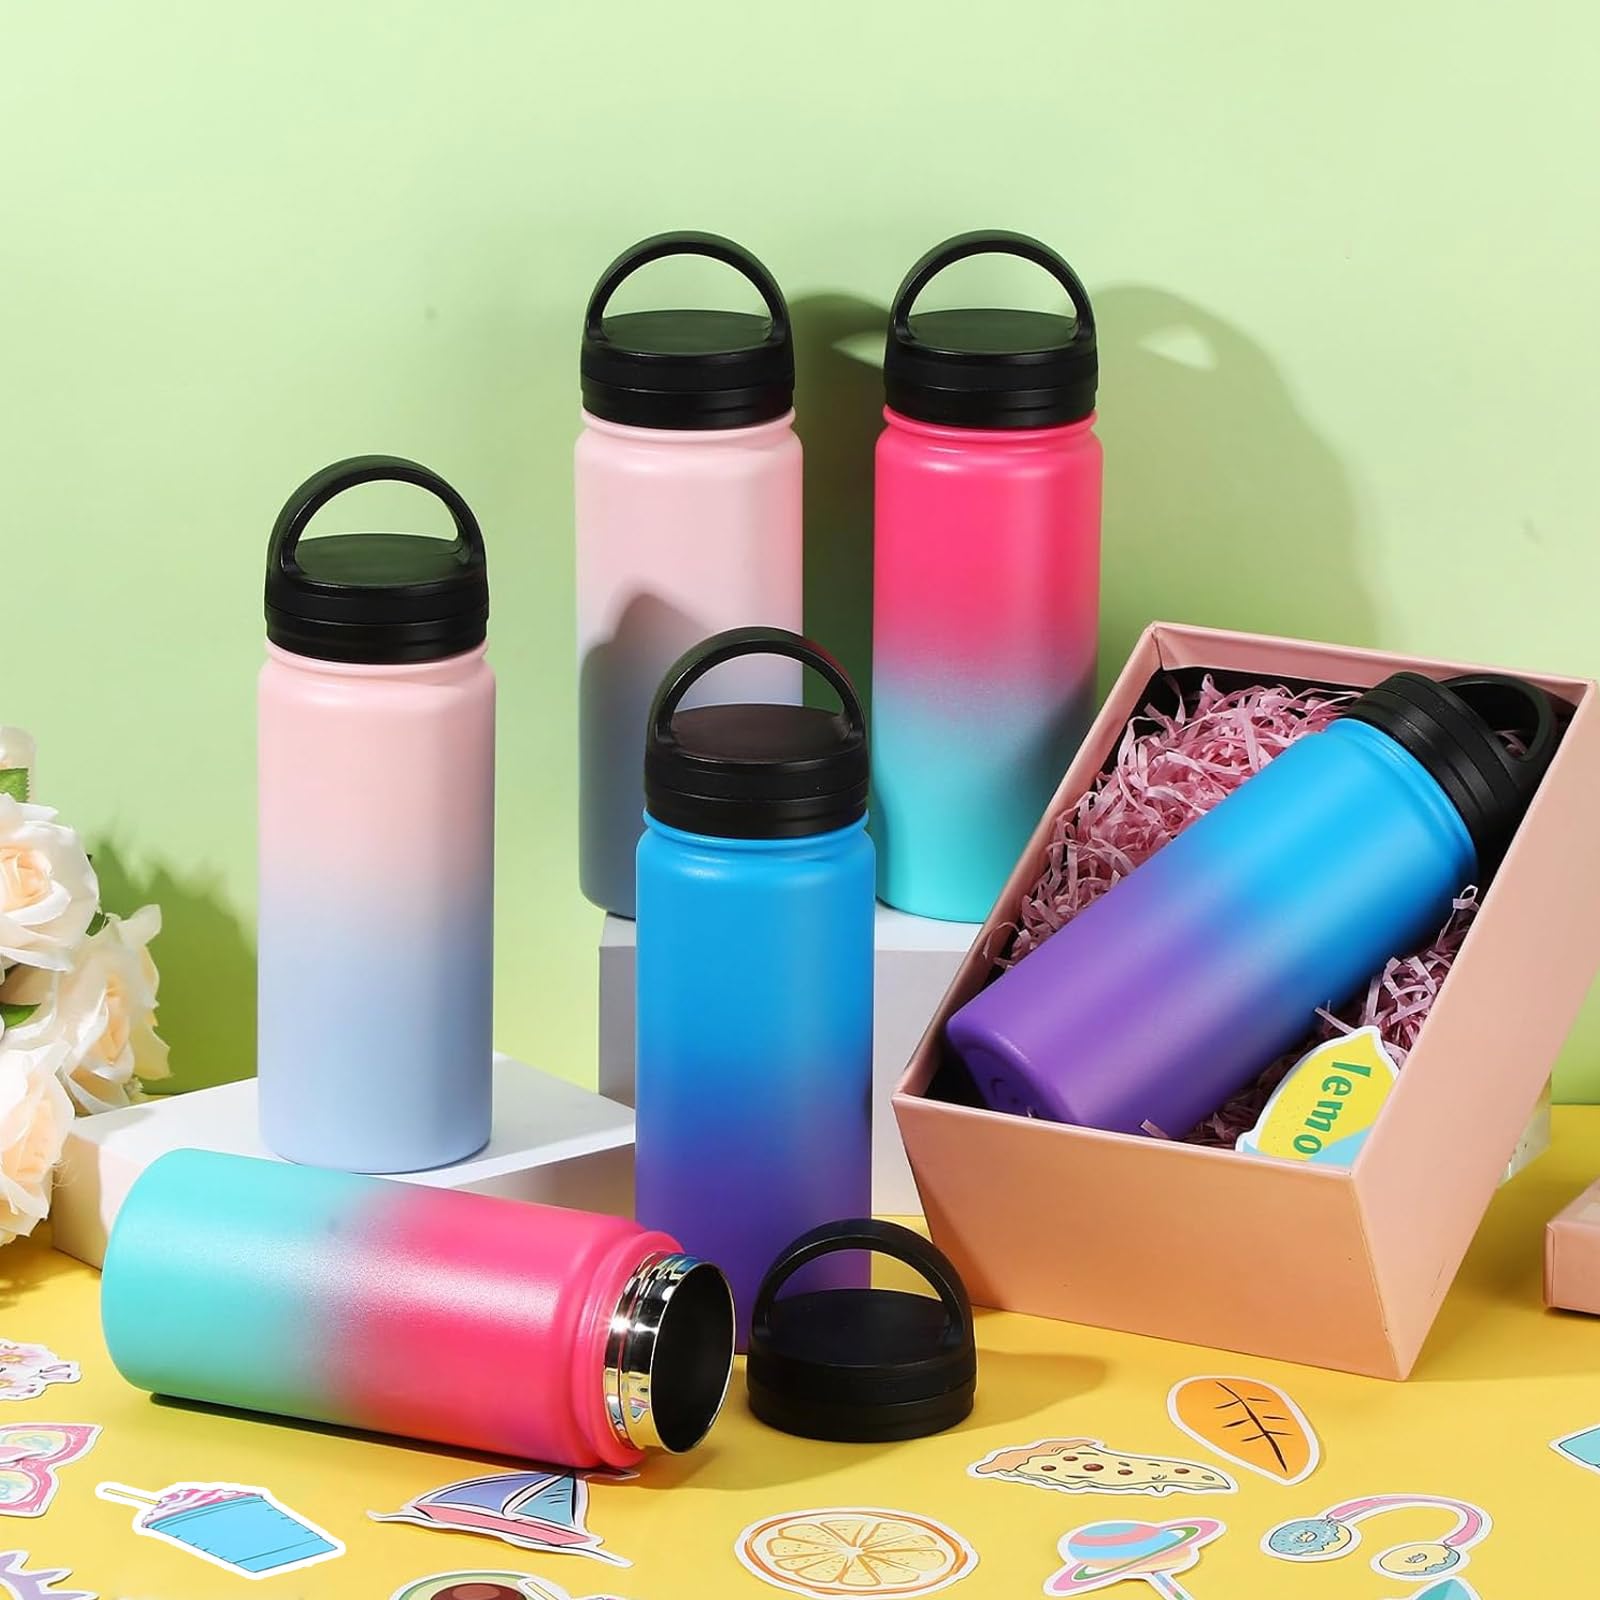 3 Pcs Kids Lovely Insulated Water Bottles Girls Boys Insulated Cups with Leakproof Lid and Cute Stickers for Valentines School Classroom Exchange Rewards Game Prizes Gifts(Gradient Color, 16oz)